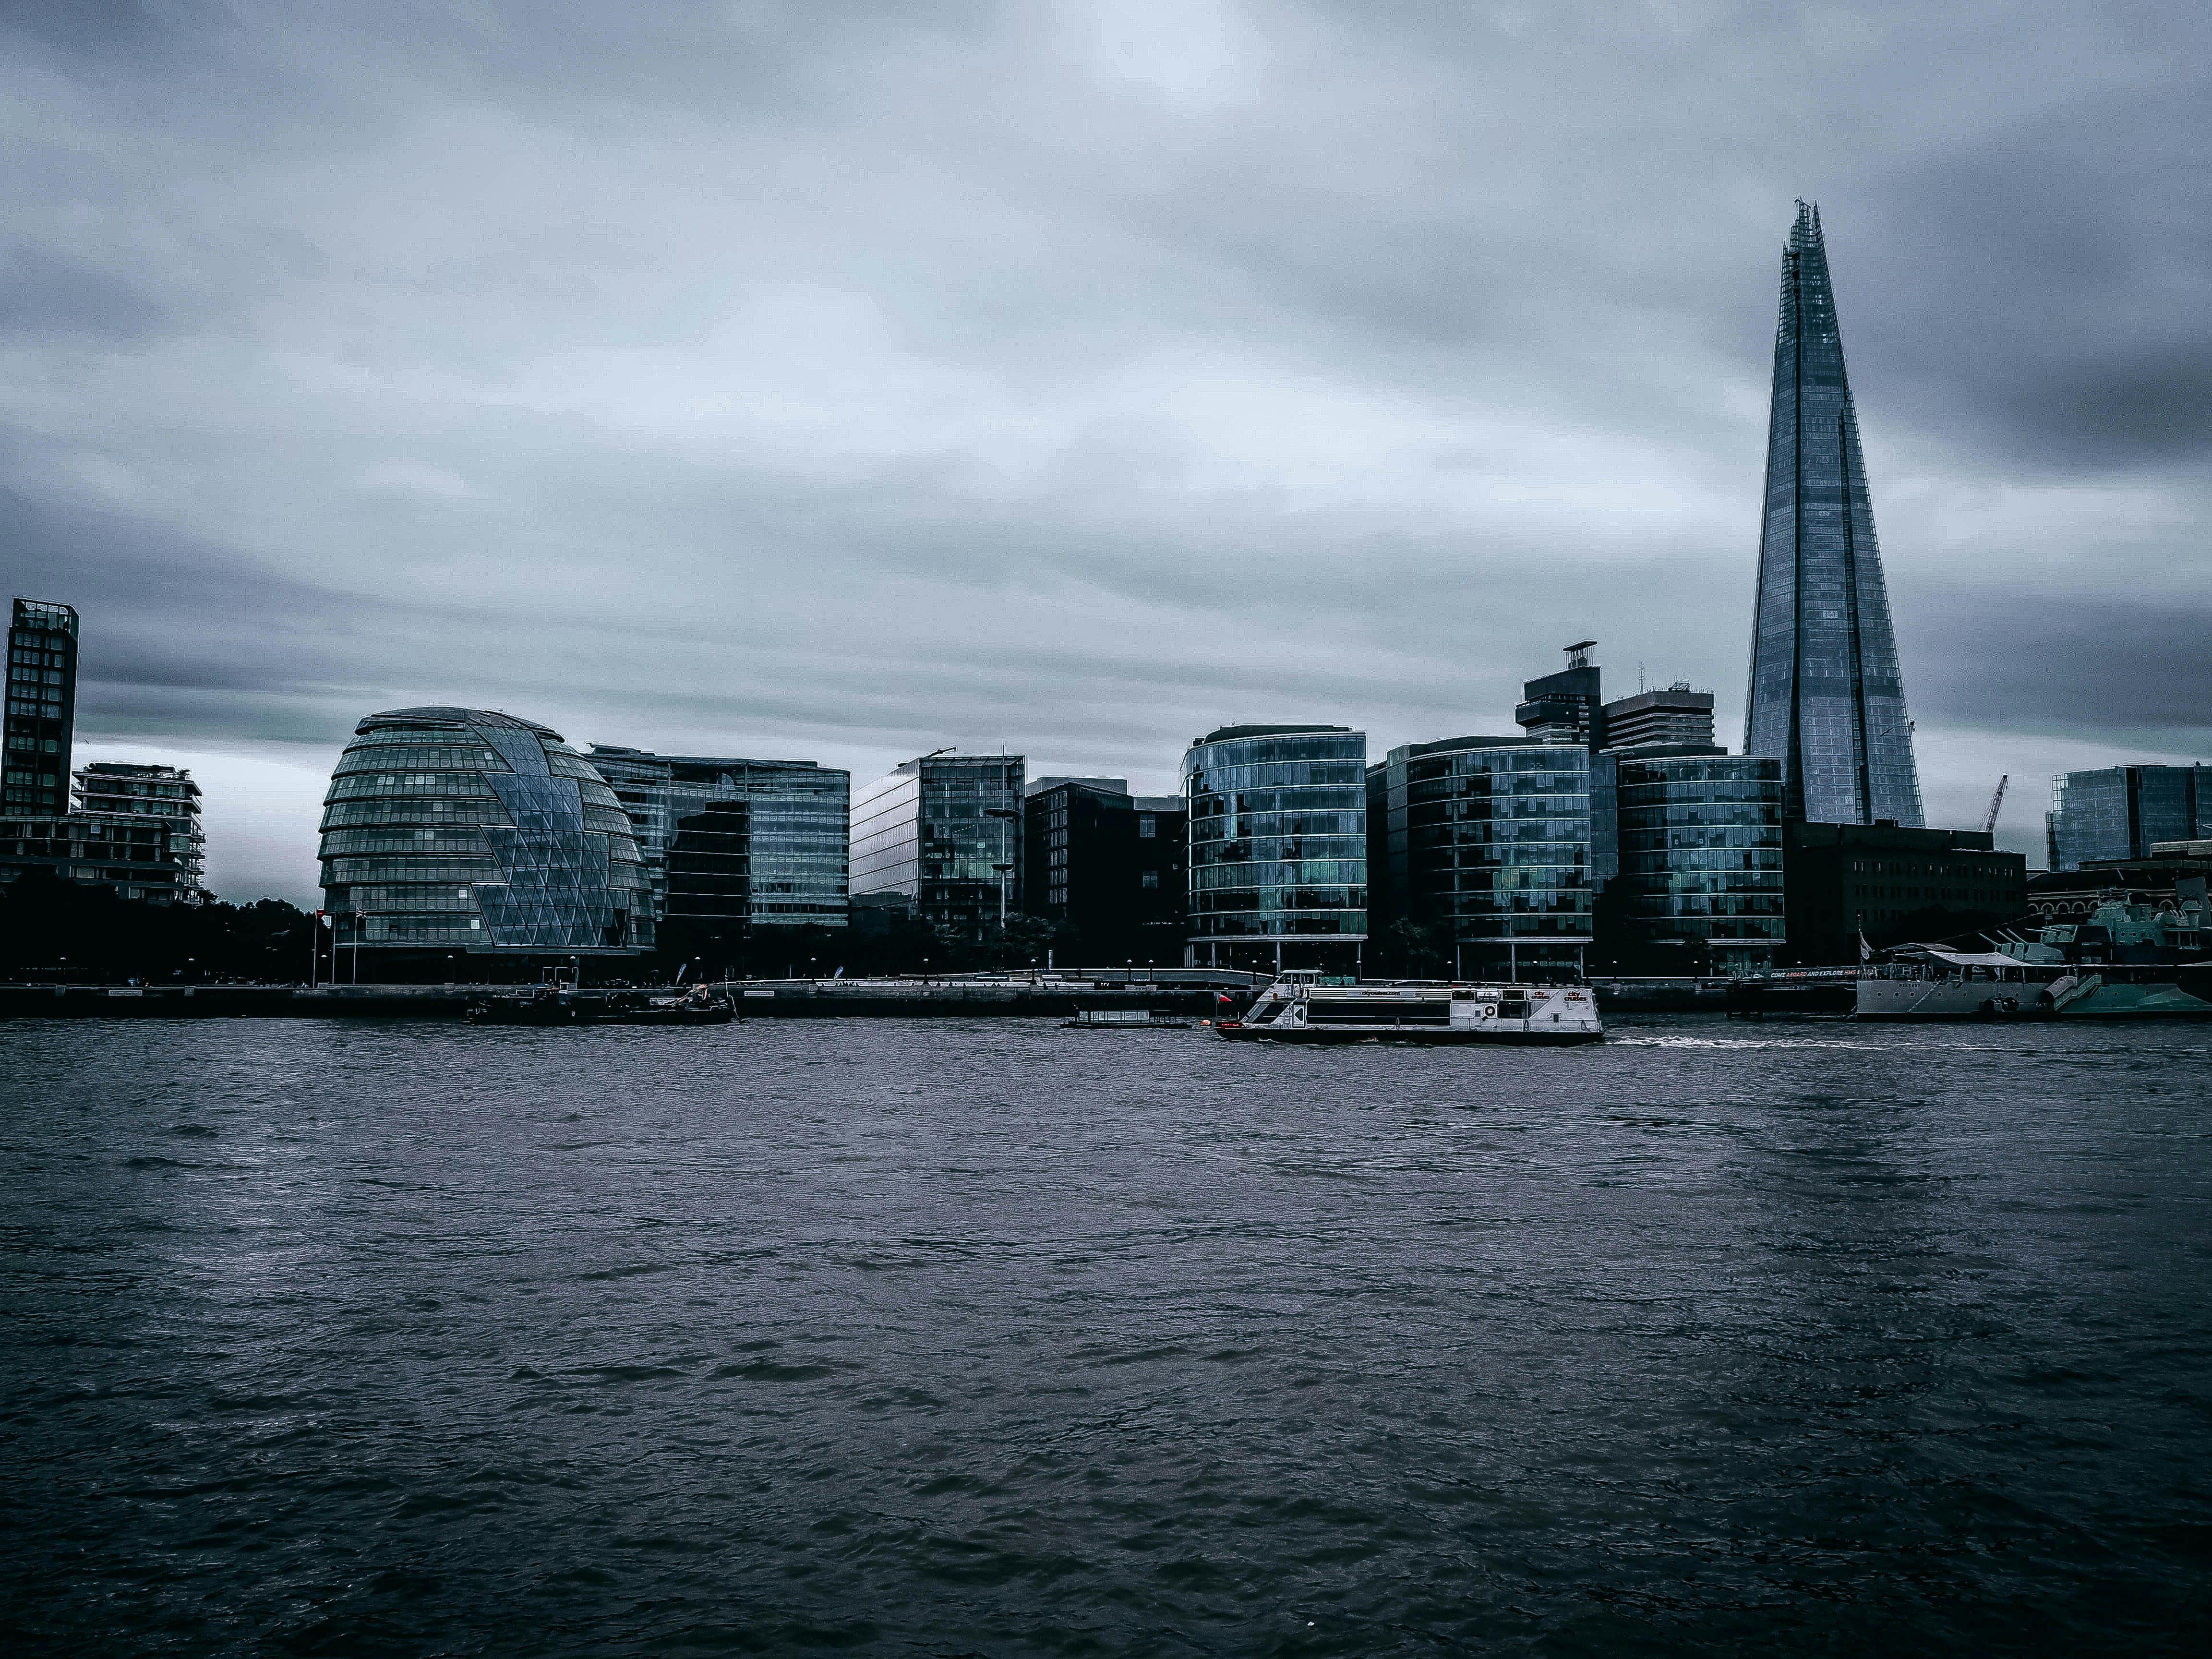 Discover Hidden Gems with Boat Tours of Londons Iconic Landmarks